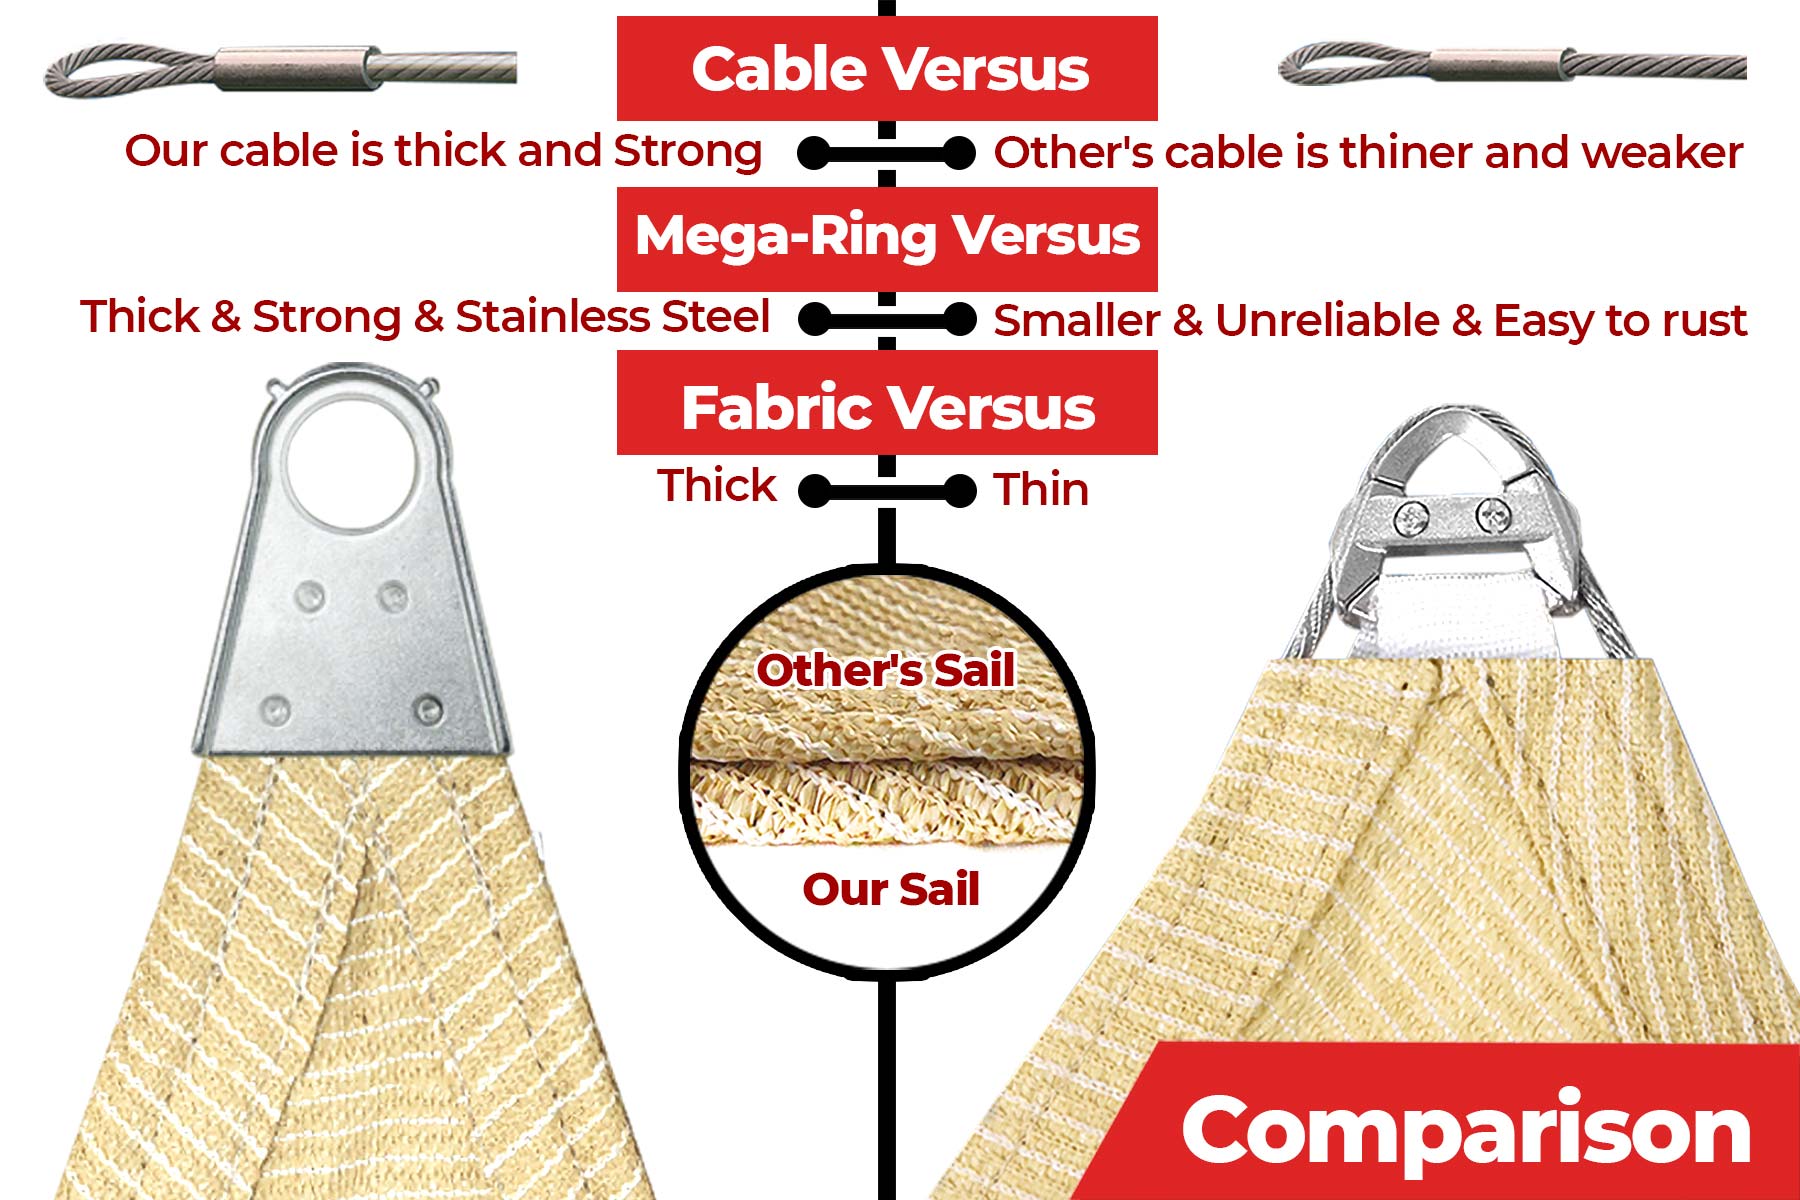 Cable Versus Mega-Ring Versus Fabric Versus Super Ring- Steel Cable Rectangle Sun Shade Sail Screen Canopy, Patio and Pergola Cover 3:2